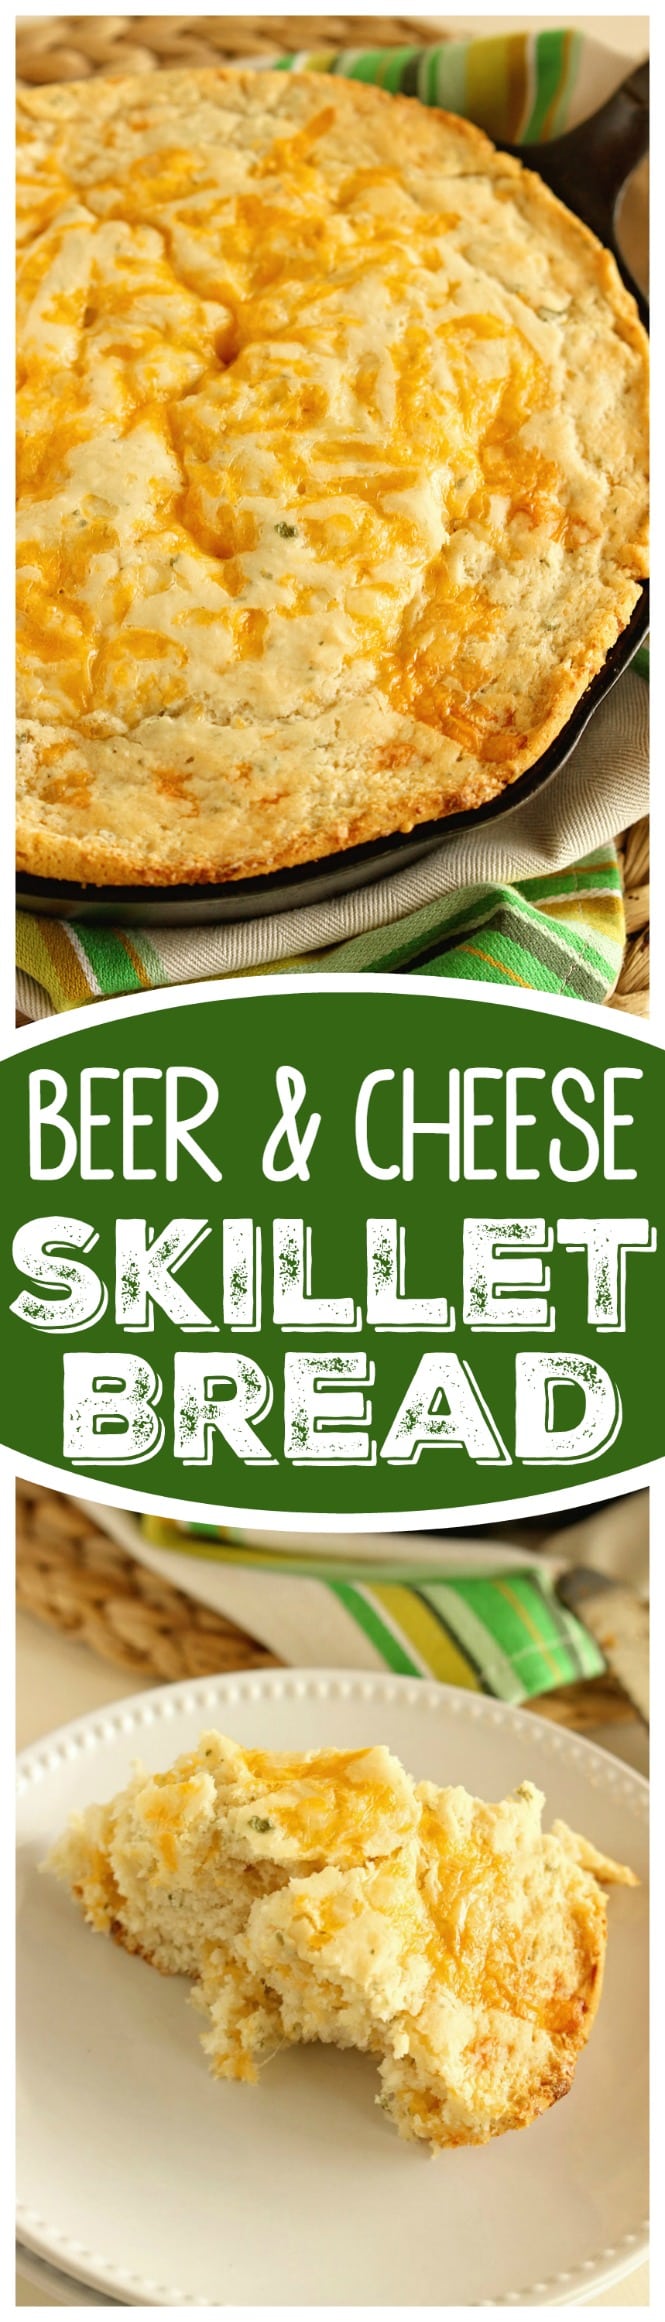 This Beer & Cheese Skillet Bread recipe is super easy and delicious!  Plus it requires minimal ingredients!